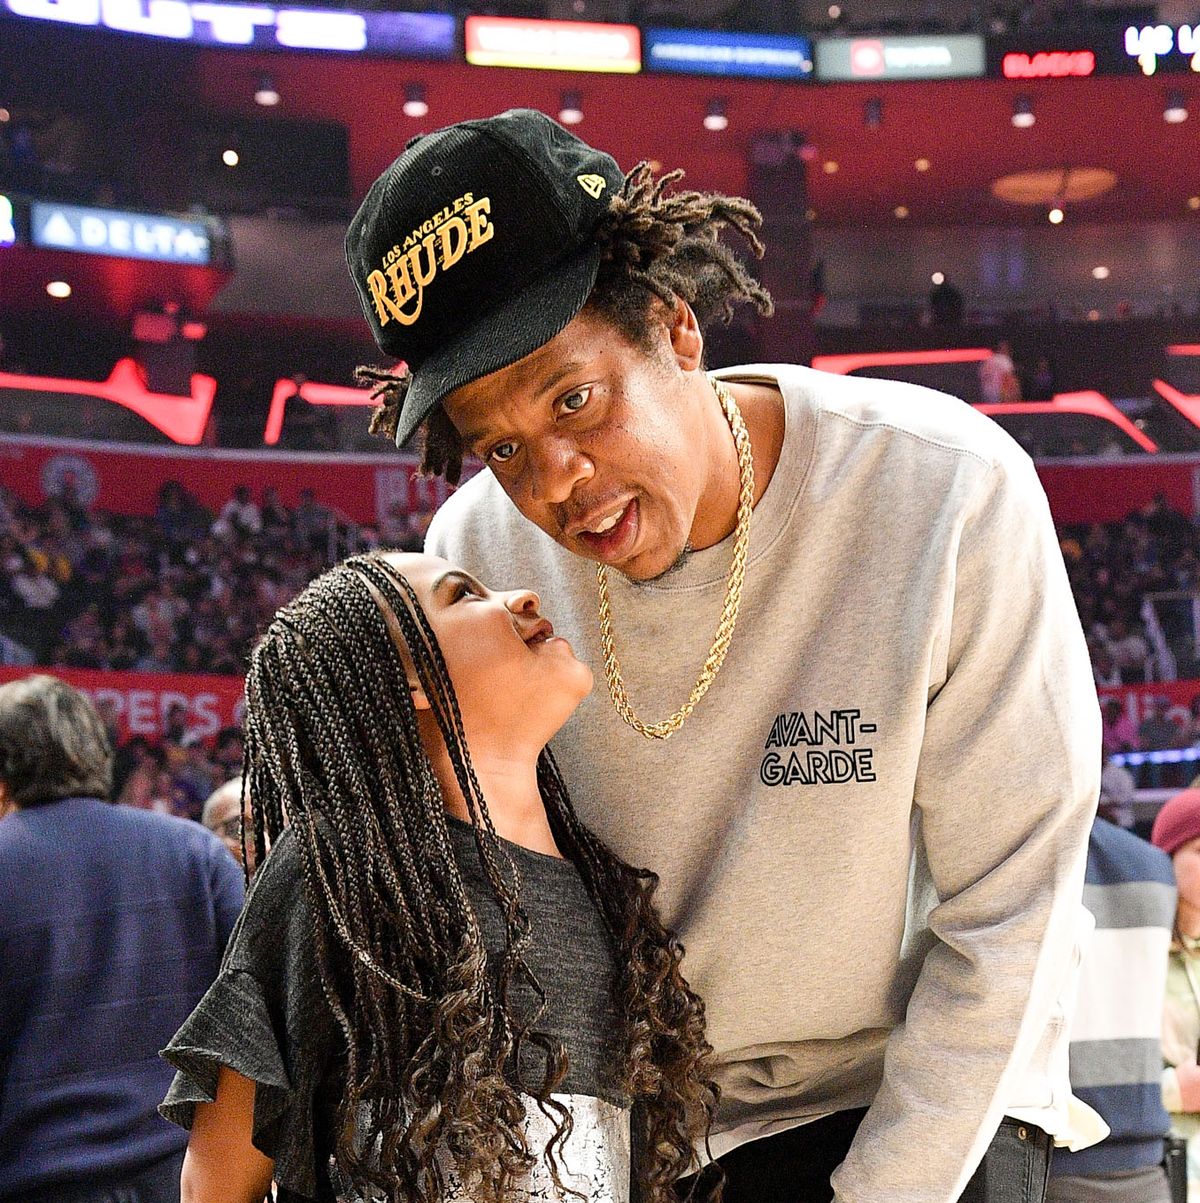 JAY-Z Attends Super Bowl 2022 With Daughter Blue Ivy Carter